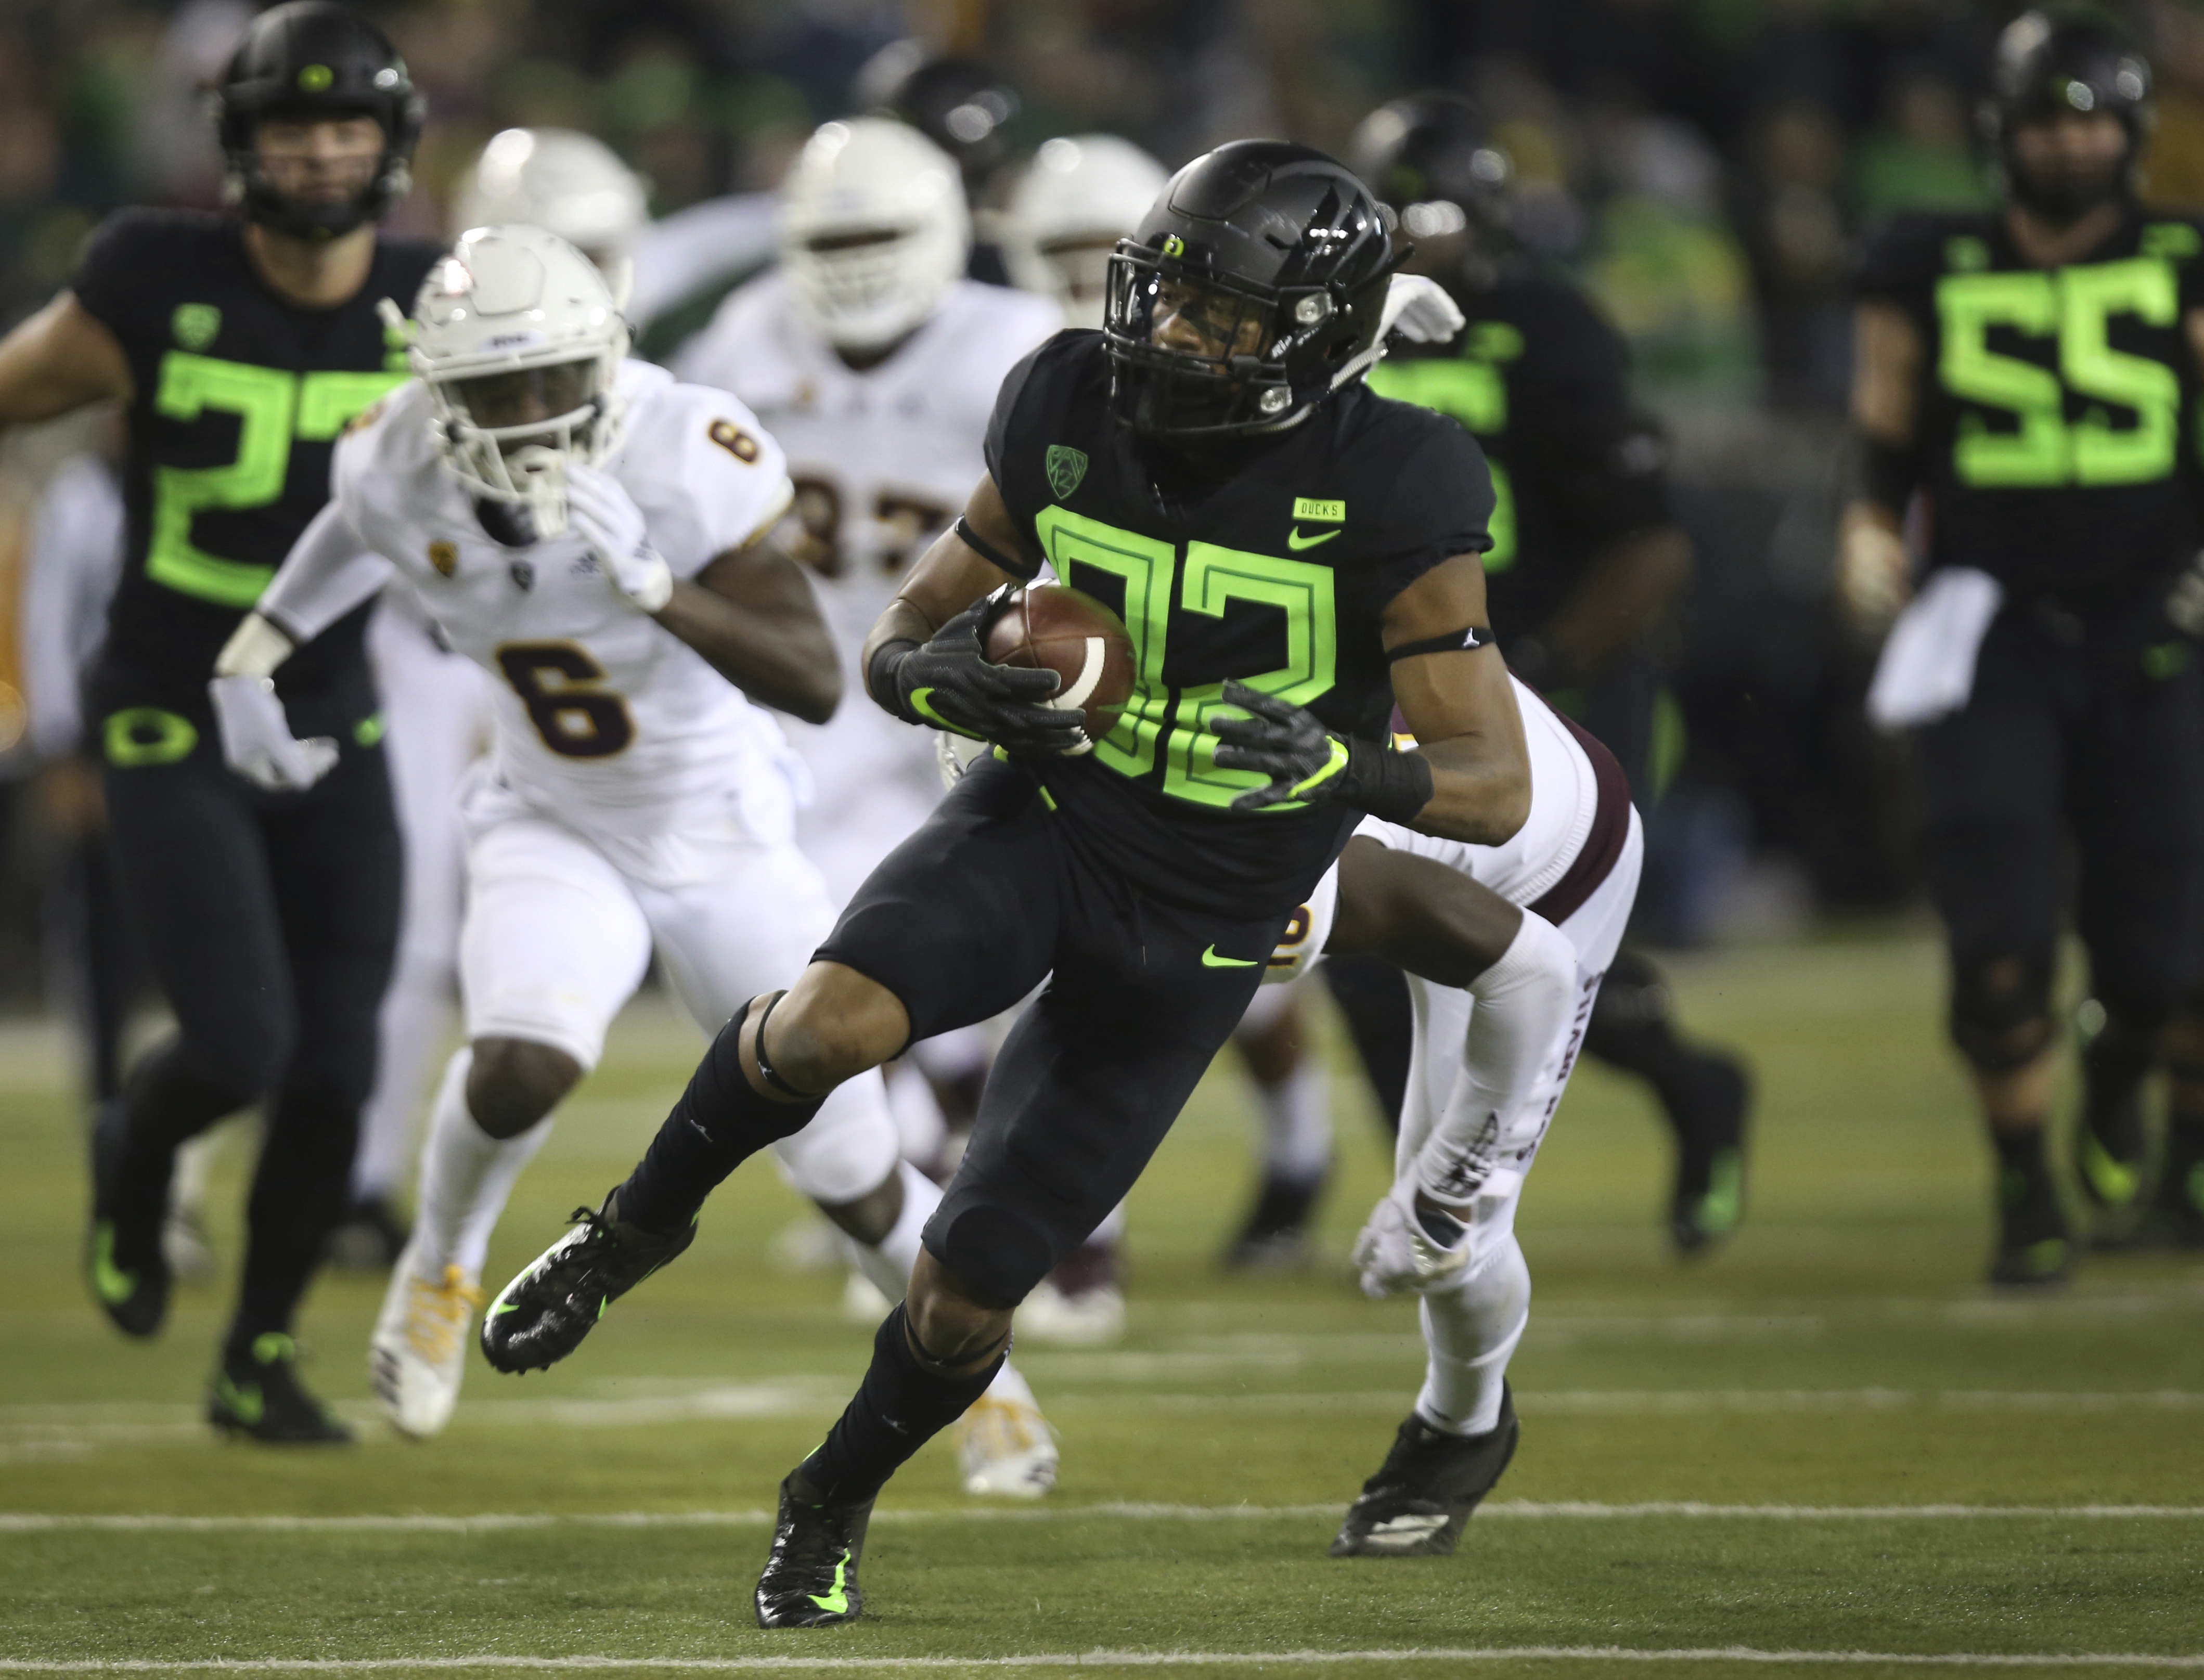 Oregon holds off late Arizona State rally to win 31-29